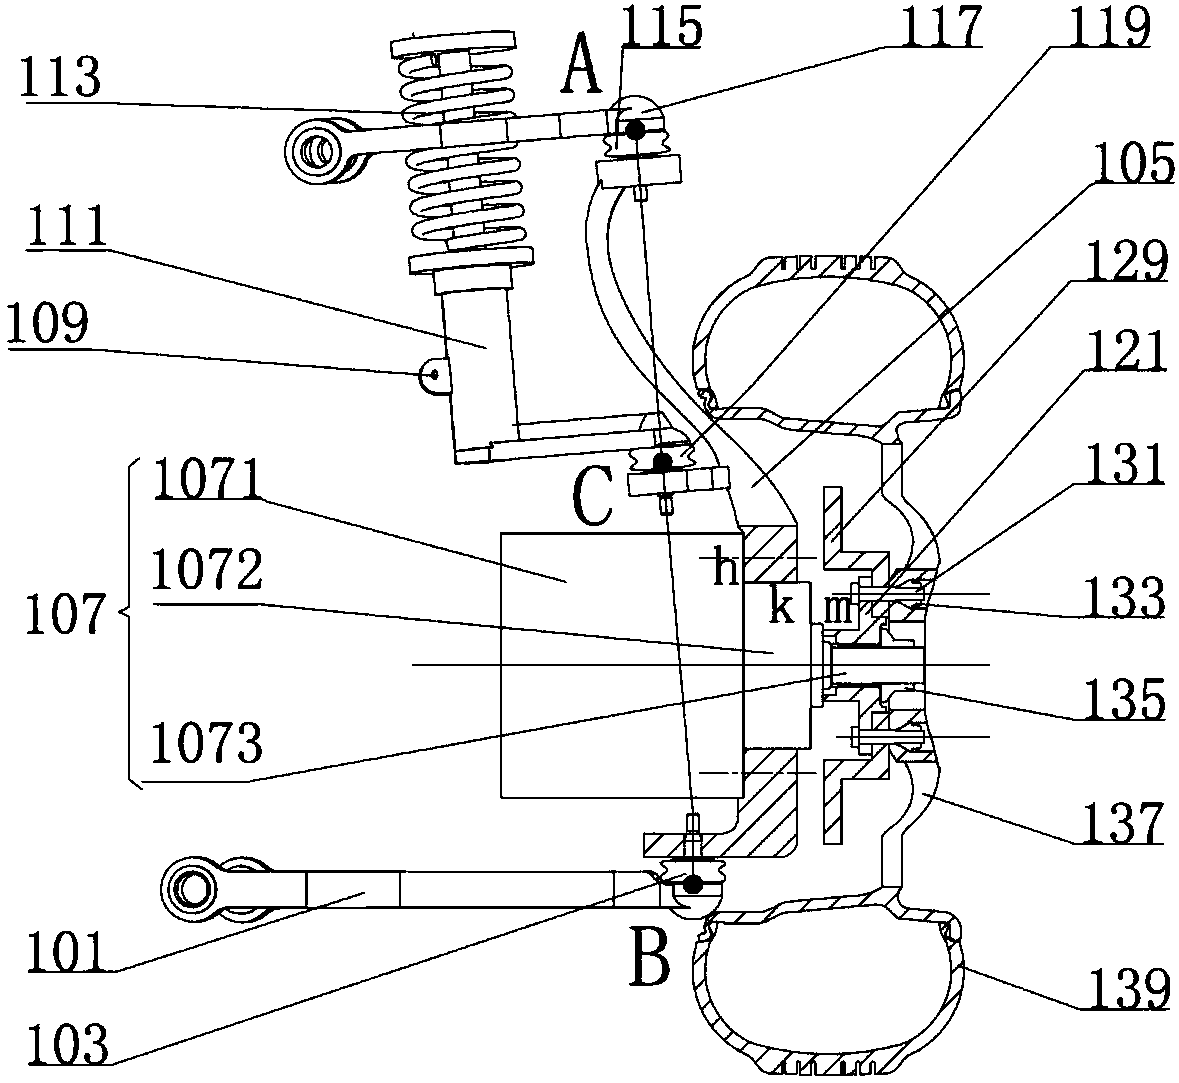 Double-wishbone front-suspension system applied to driving of inner rotor hub motor